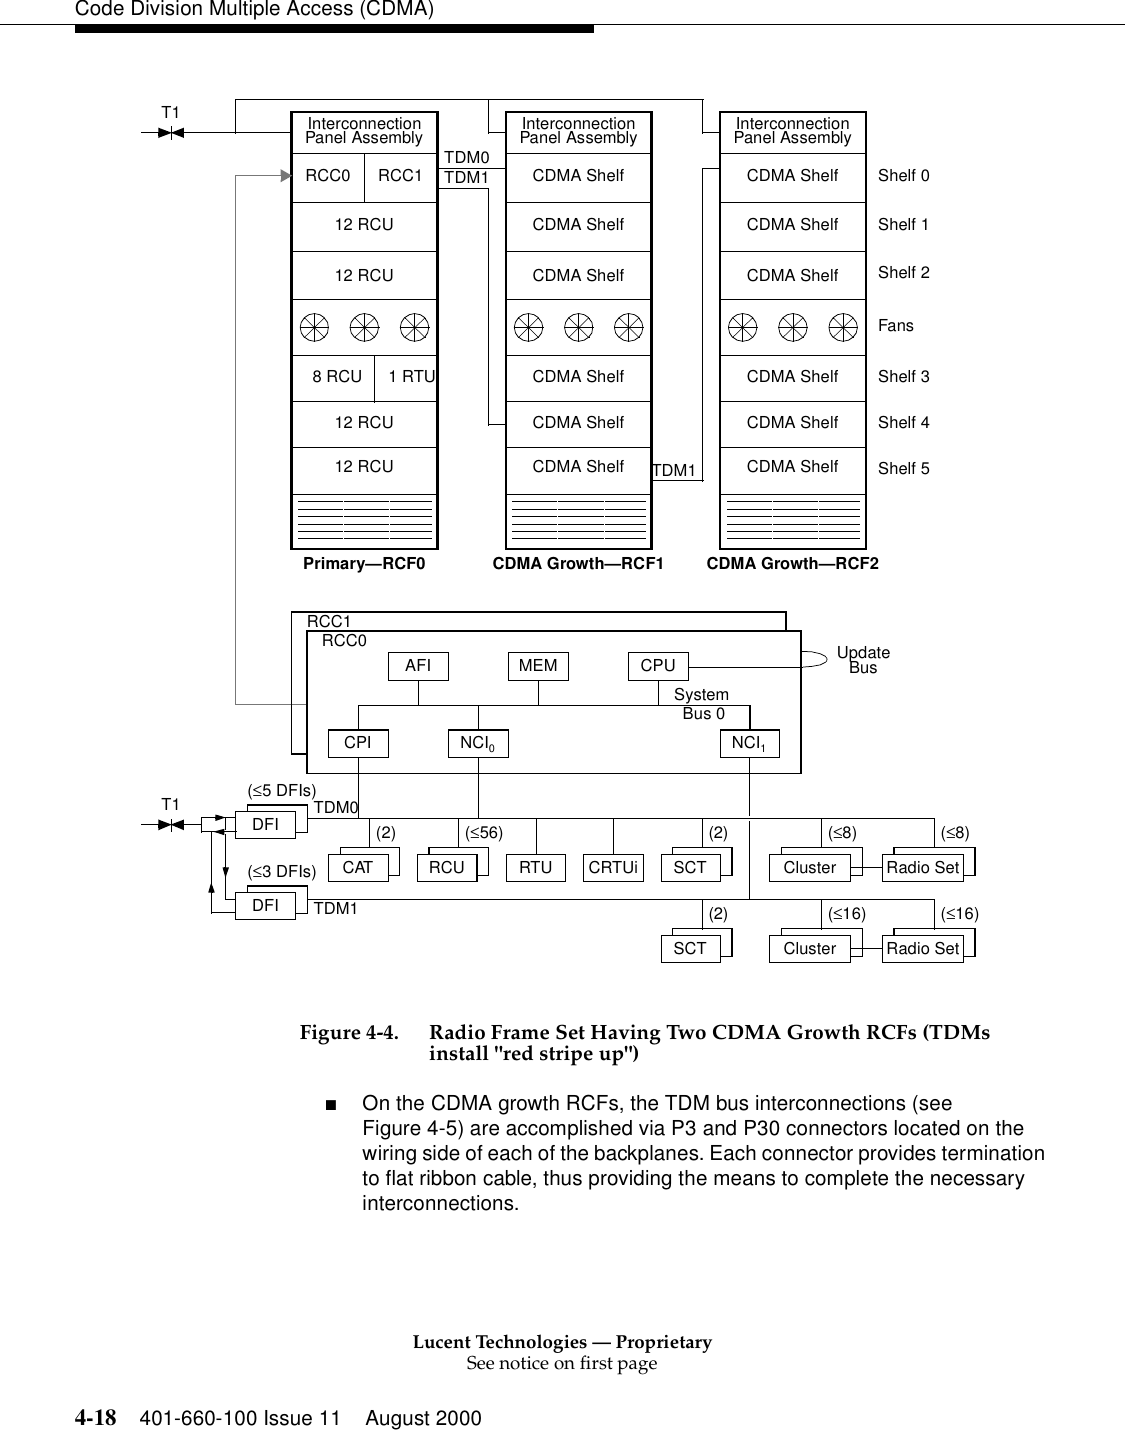 Lucent Technologies — ProprietarySee notice on first page4-18 401-660-100 Issue 11 August 2000Code Division Multiple Access (CDMA)Figure 4-4. Radio Frame Set Having Two CDMA Growth RCFs (TDMs install &quot;red stripe up&quot;)■On the CDMA growth RCFs, the TDM bus interconnections (see Figure 4-5) are accomplished via P3 and P30 connectors located on the wiring side of each of the backplanes. Each connector provides termination to flat ribbon cable, thus providing the means to complete the necessary interconnections.CAT(2)RCC0 RCC1Primary—RCF08 RCU12 RCU12 RCU12 RCU12 RCUTDM0TDM1InterconnectionPanel AssemblyMEMAFISystem Bus 0RCC1RCC0T11 RTUShelf 0Shelf 1FansShelf 3Shelf 4Shelf 5Shelf 2NCI1RCU(≤56)CPI NCI0SCT(2)DS1(≤3 DFIs)DS1T1 DFI(≤5 DFIs)DFITDM0SCT(2)CDMA ShelfCDMA ShelfCDMA ShelfCDMA ShelfCDMA ShelfCDMA ShelfInterconnectionPanel AssemblyCDMA ShelfCDMA ShelfCDMA ShelfCDMA ShelfCDMA ShelfCDMA ShelfInterconnectionPanel AssemblyCDMA Growth—RCF1 CDMA Growth—RCF2TDM1TDM1RTU CRTUiUpdateBusCPU(≤8)Radio Set(≤8)Cluster(≤16)Radio Set(≤16)Cluster